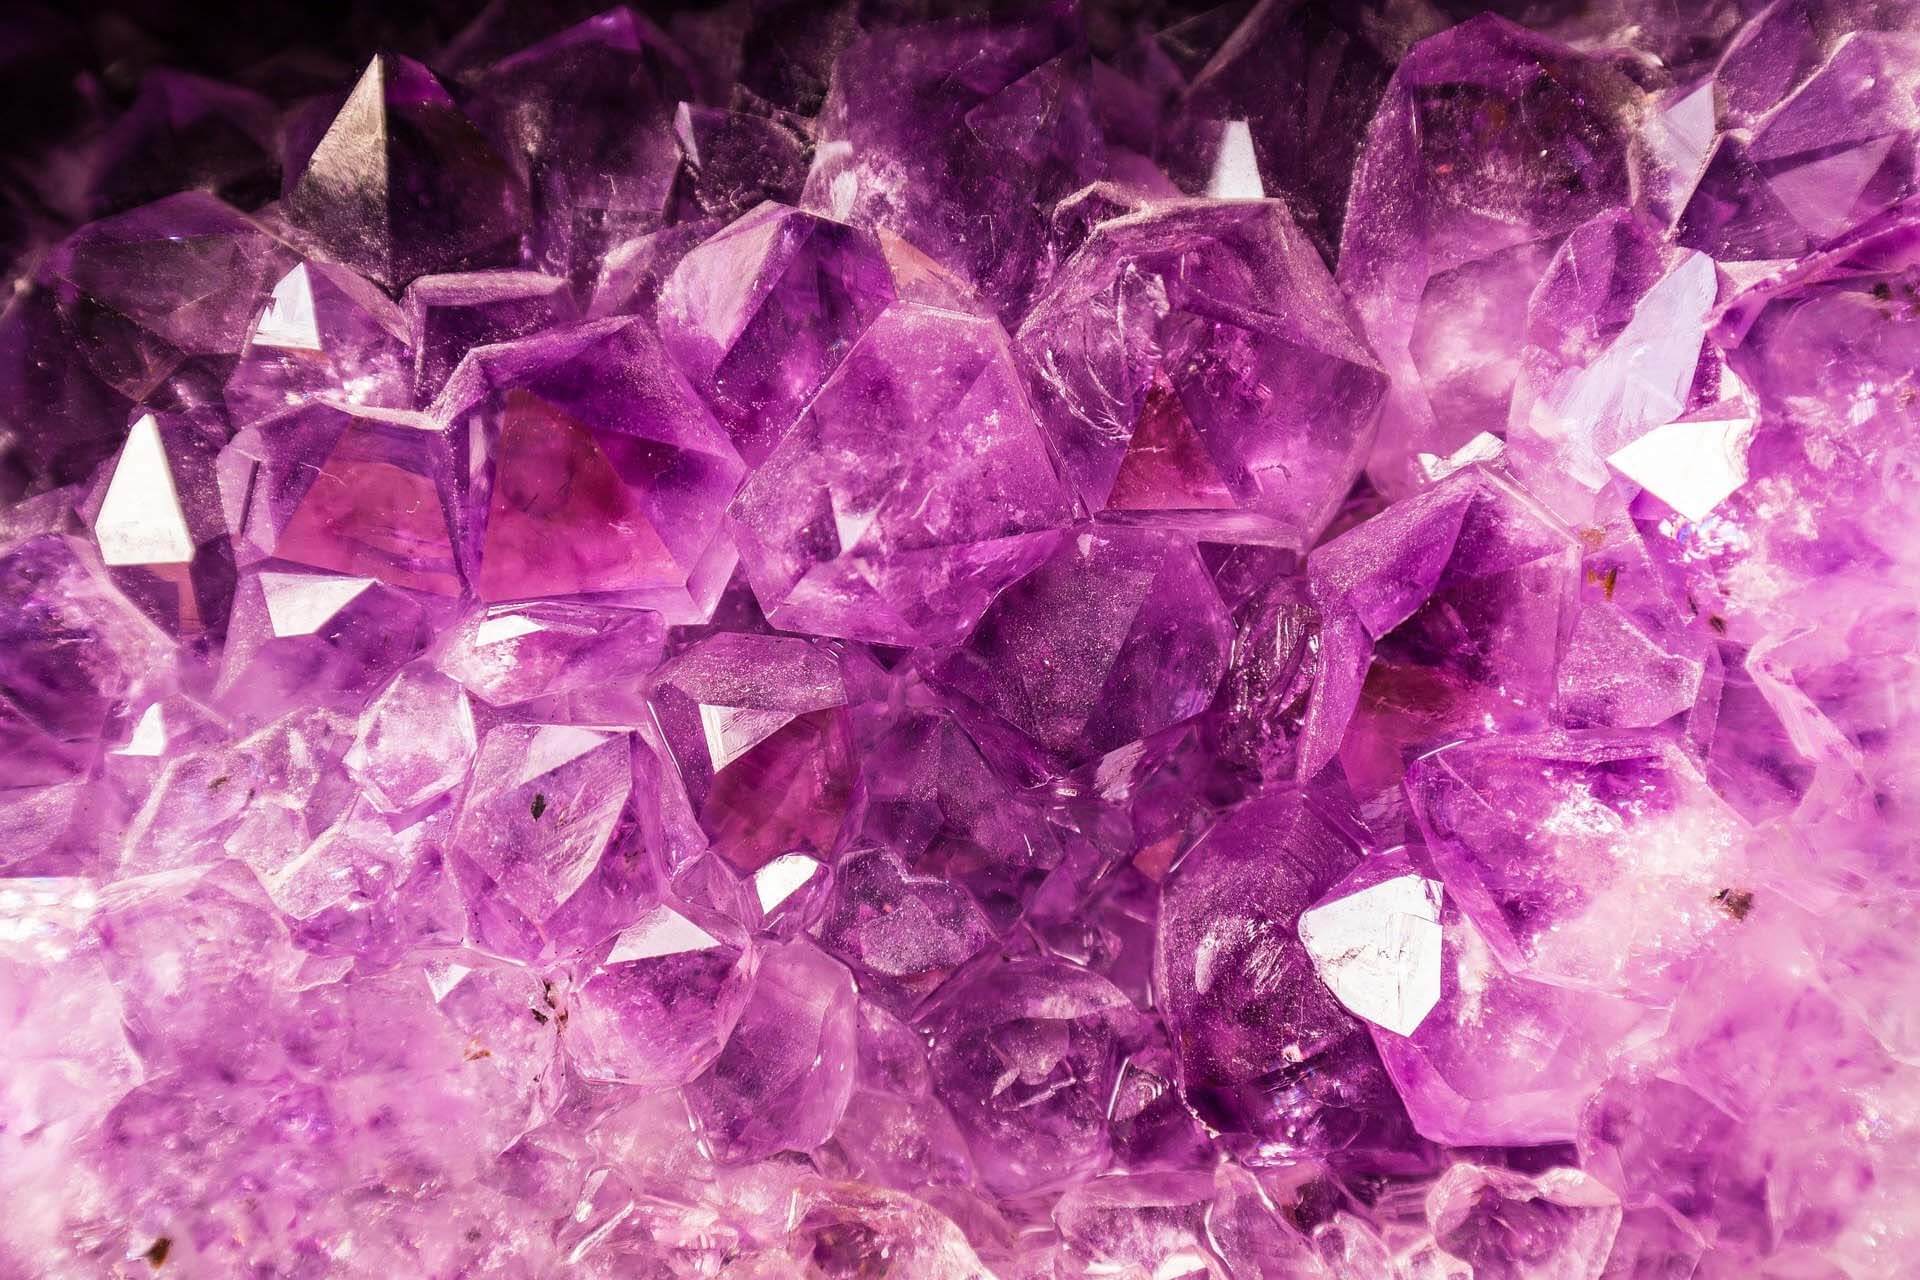 8 Powerful Crystals for Shamanic Journeying and Inner Work